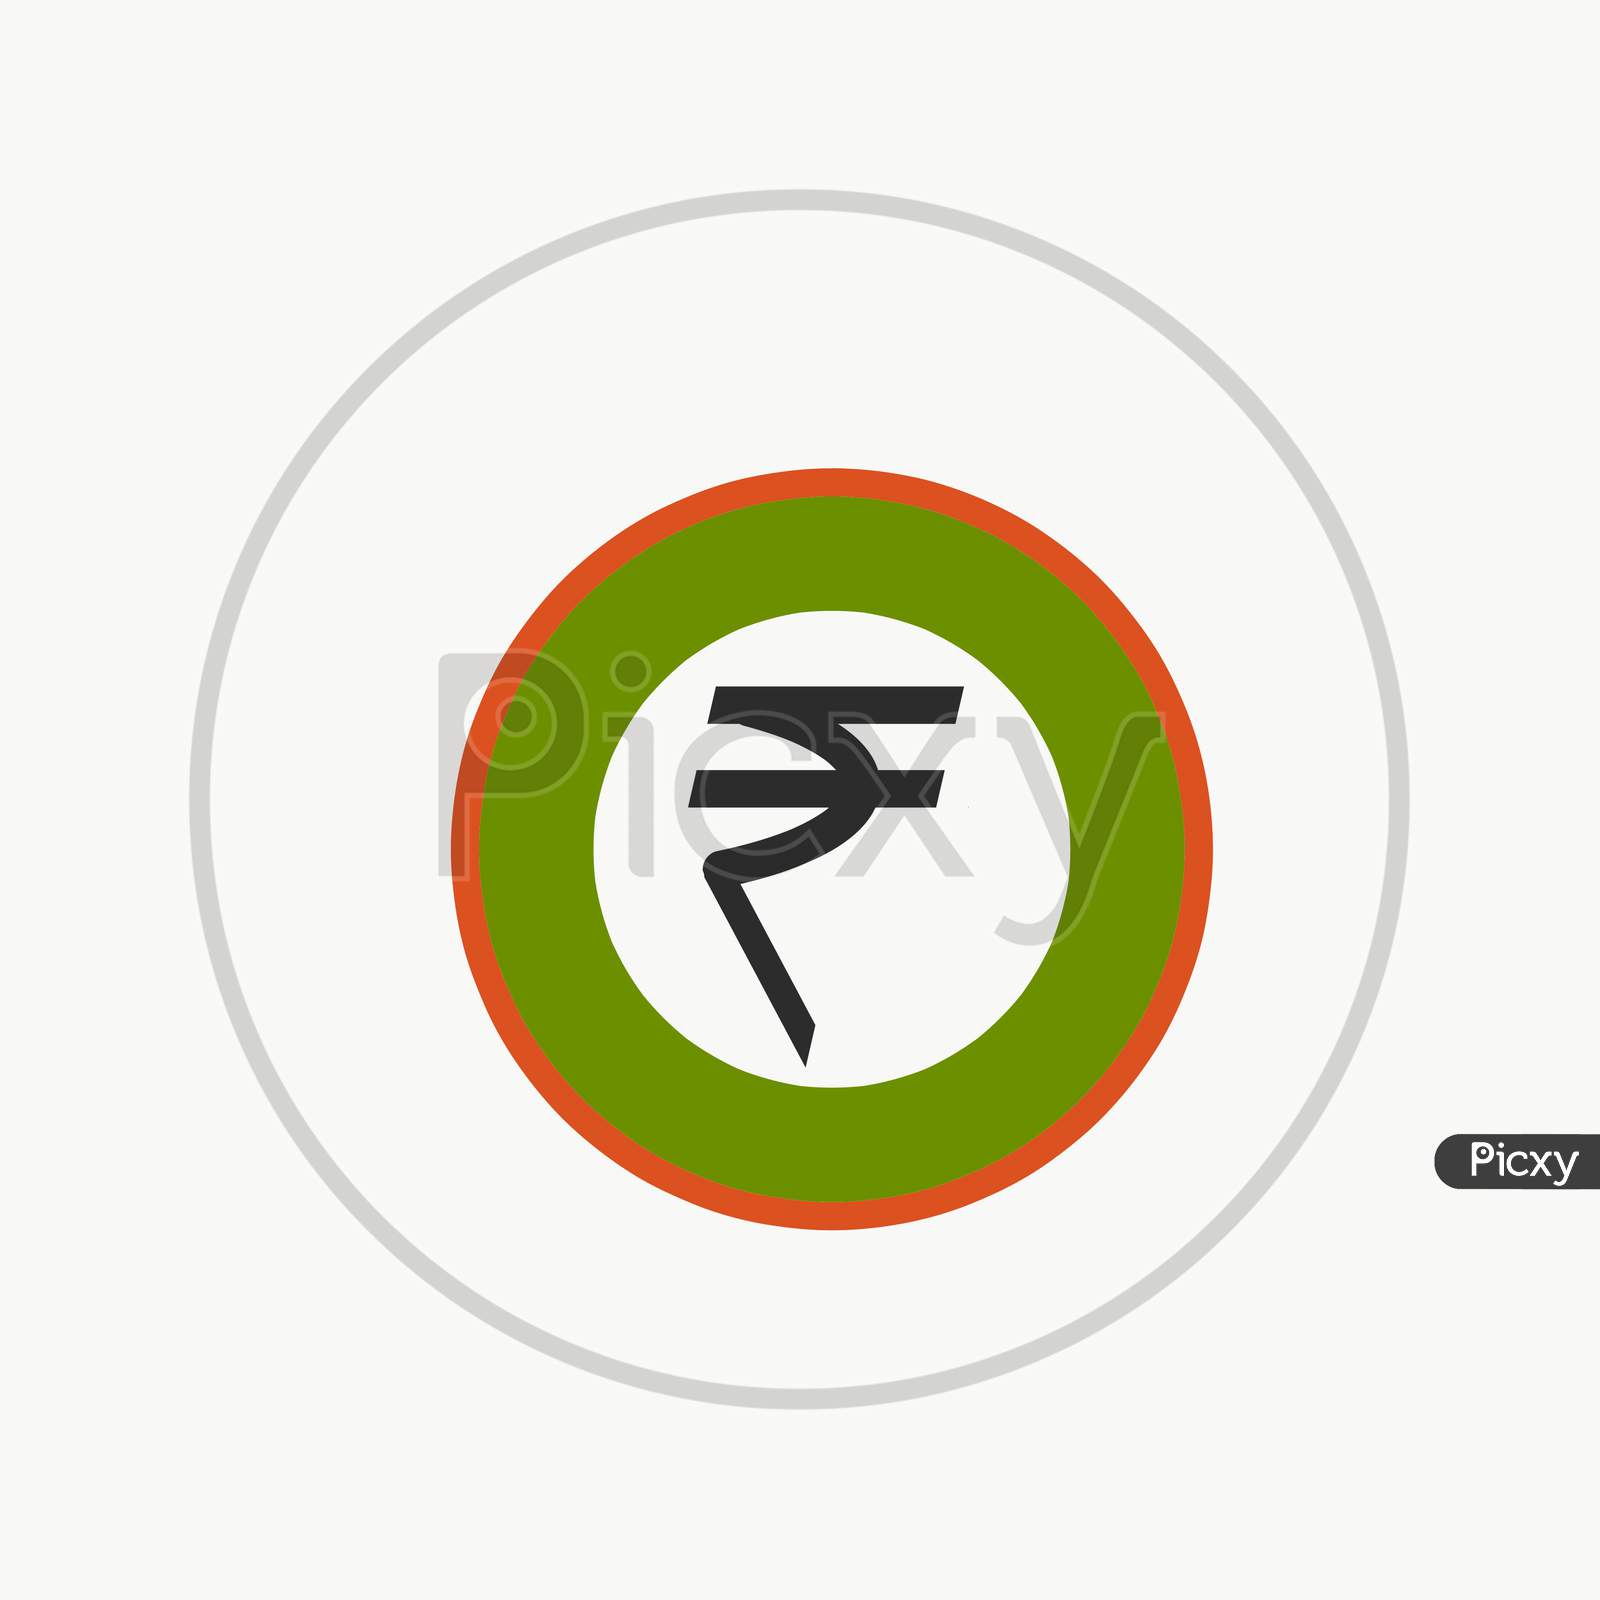 Black Rupee Sign In Green And Orange Circle